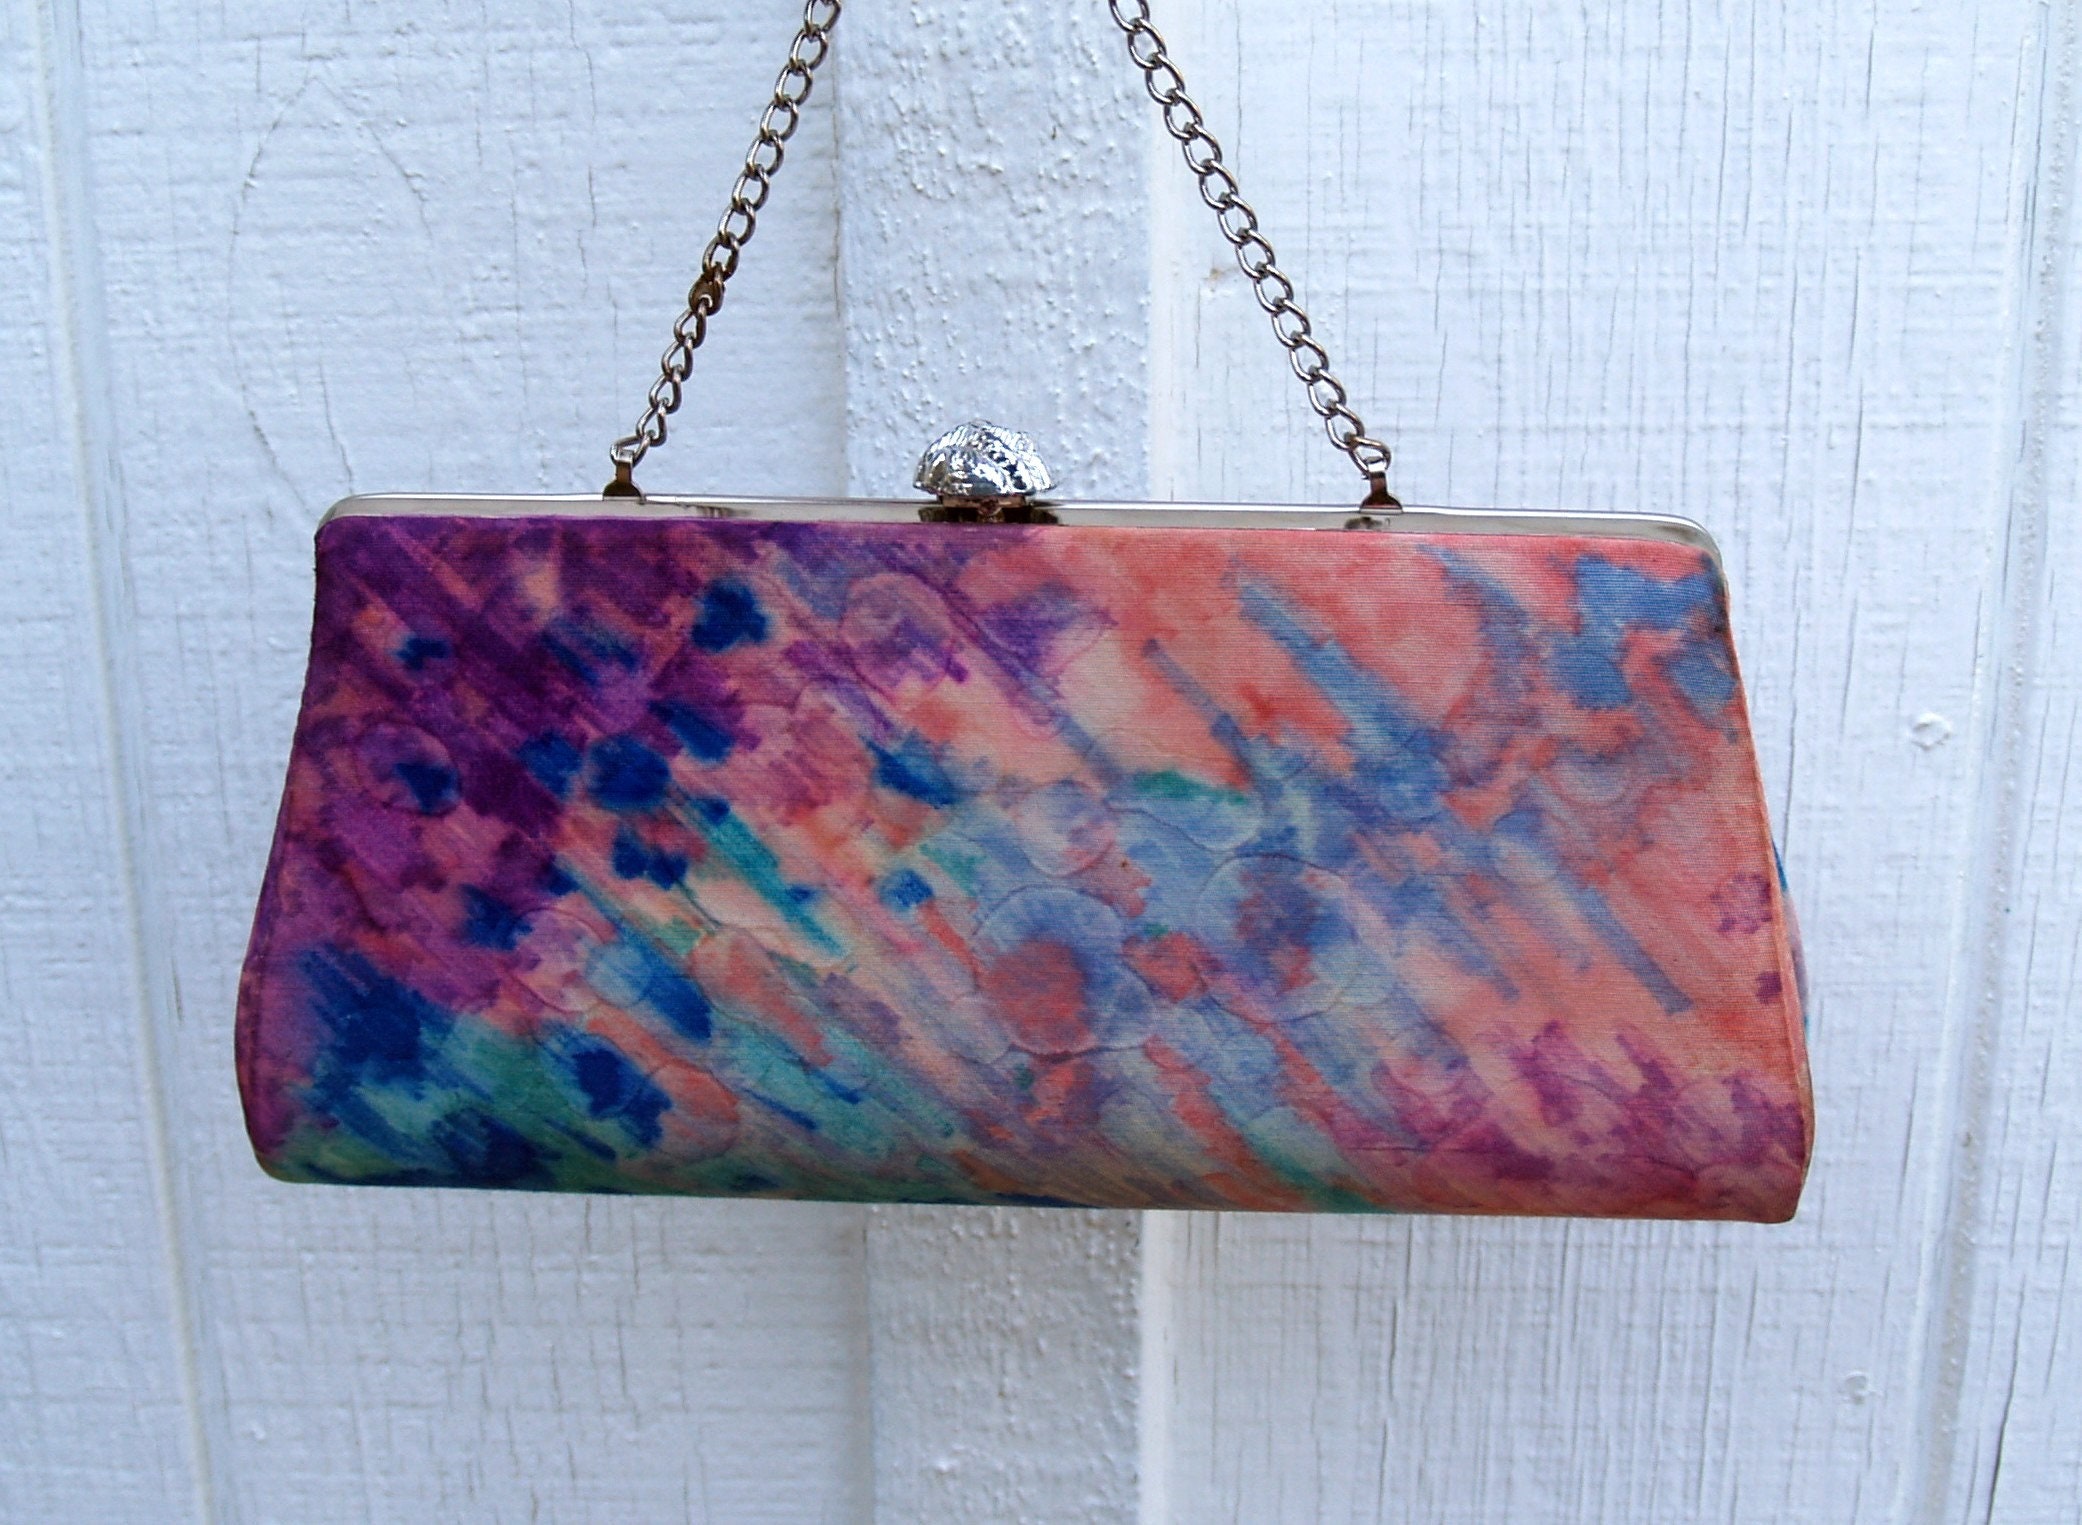 Upcycled Mid Century Hand Bag Hand Colored Clutch - Etsy